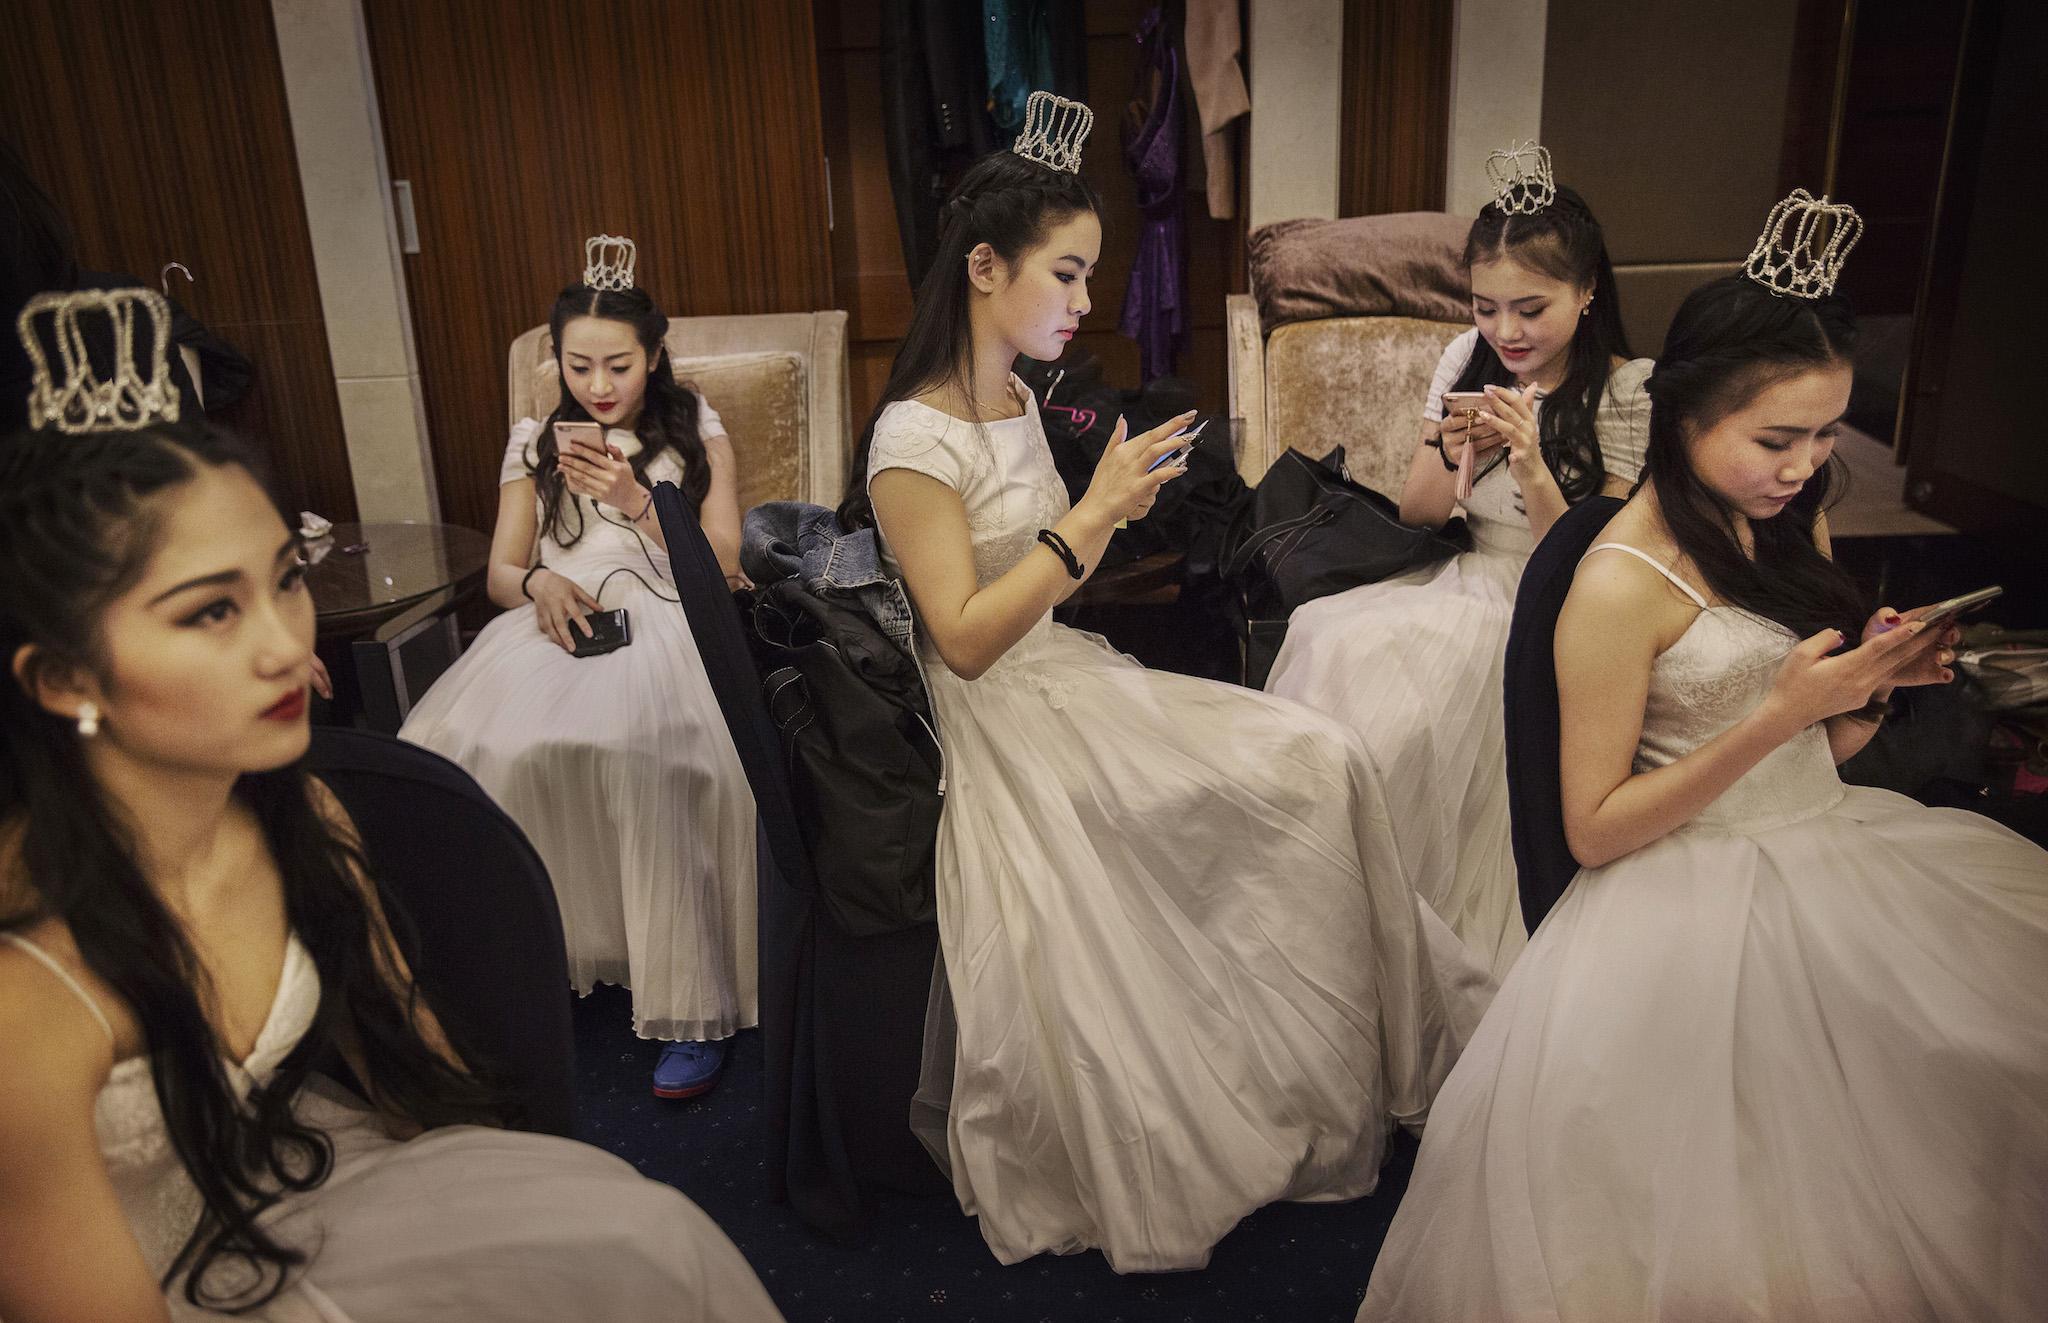 Debutantes from a local academy look at their mobile phones before taking part in the Vienna Ball at the Kempinski Hotel on March 19, 2016 in Beijing, China